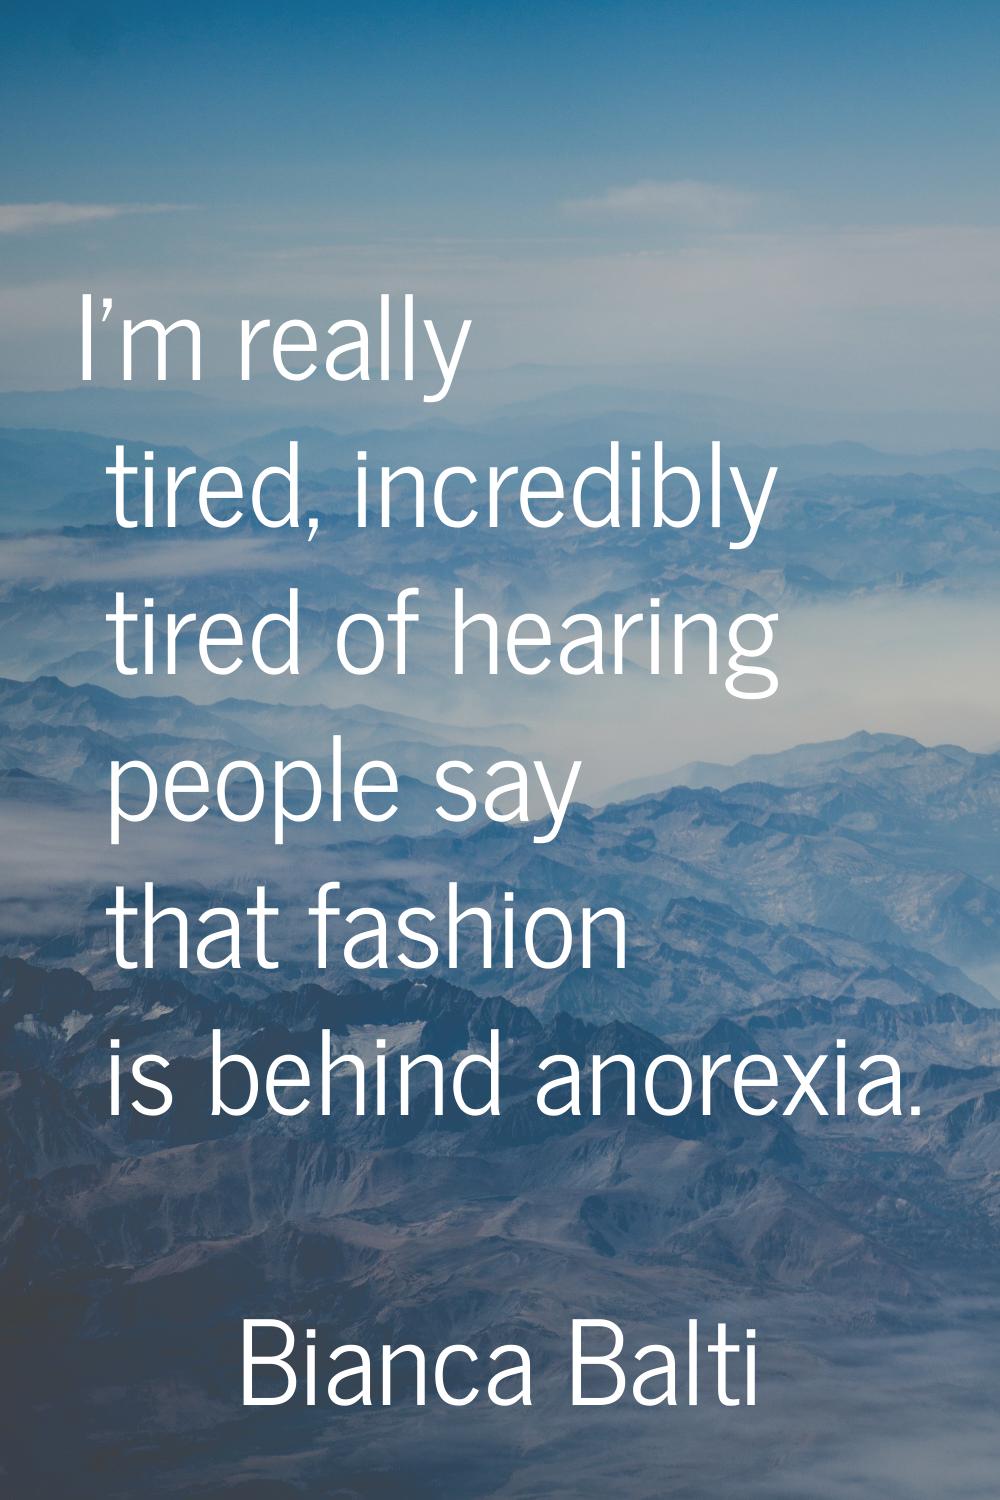 I'm really tired, incredibly tired of hearing people say that fashion is behind anorexia.